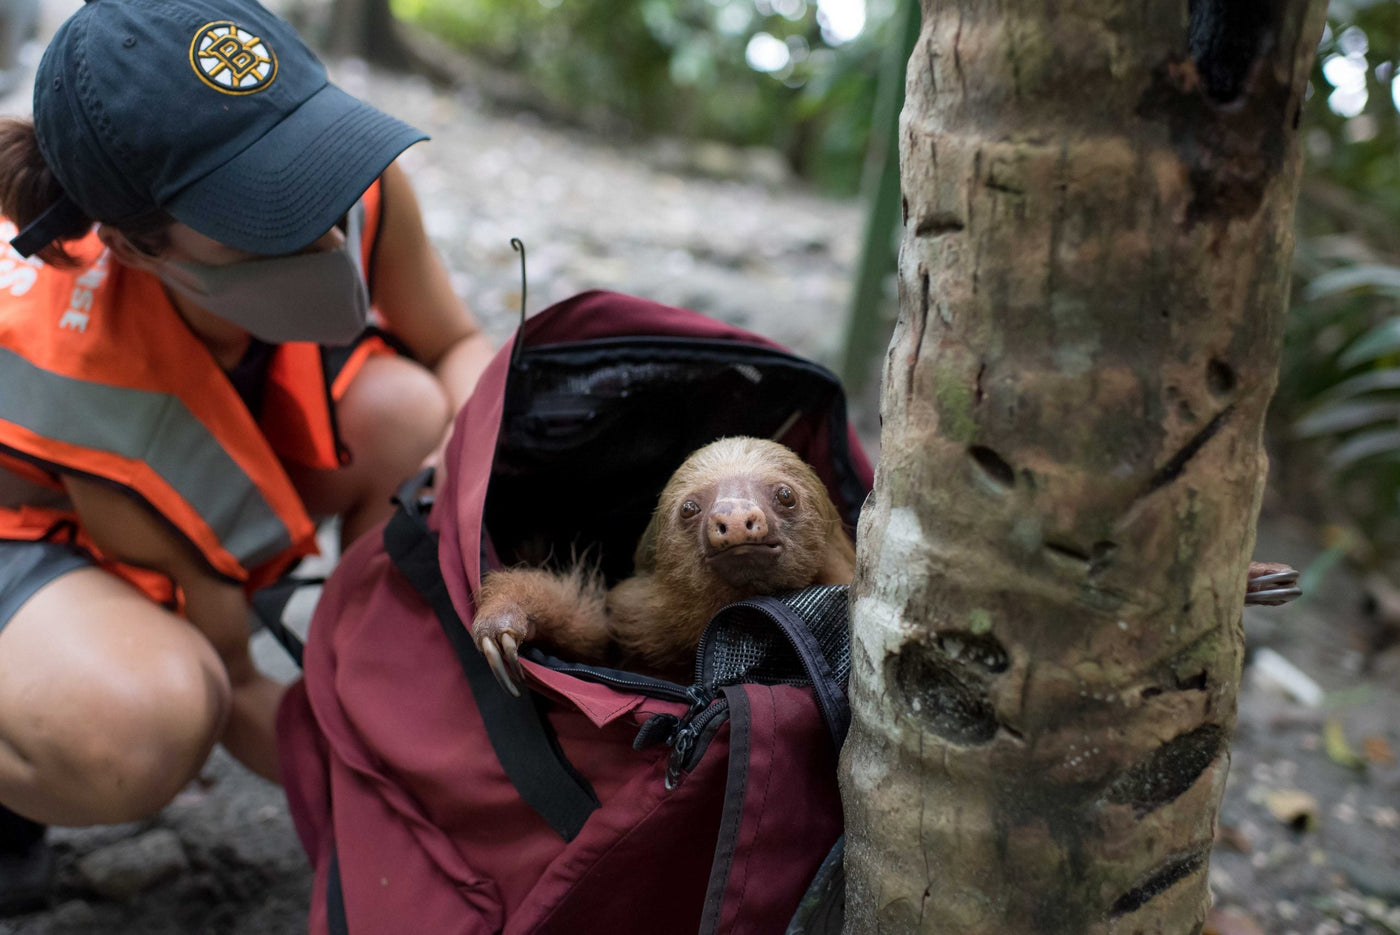 The 7 greatest threats to sloths in the Costa Rica